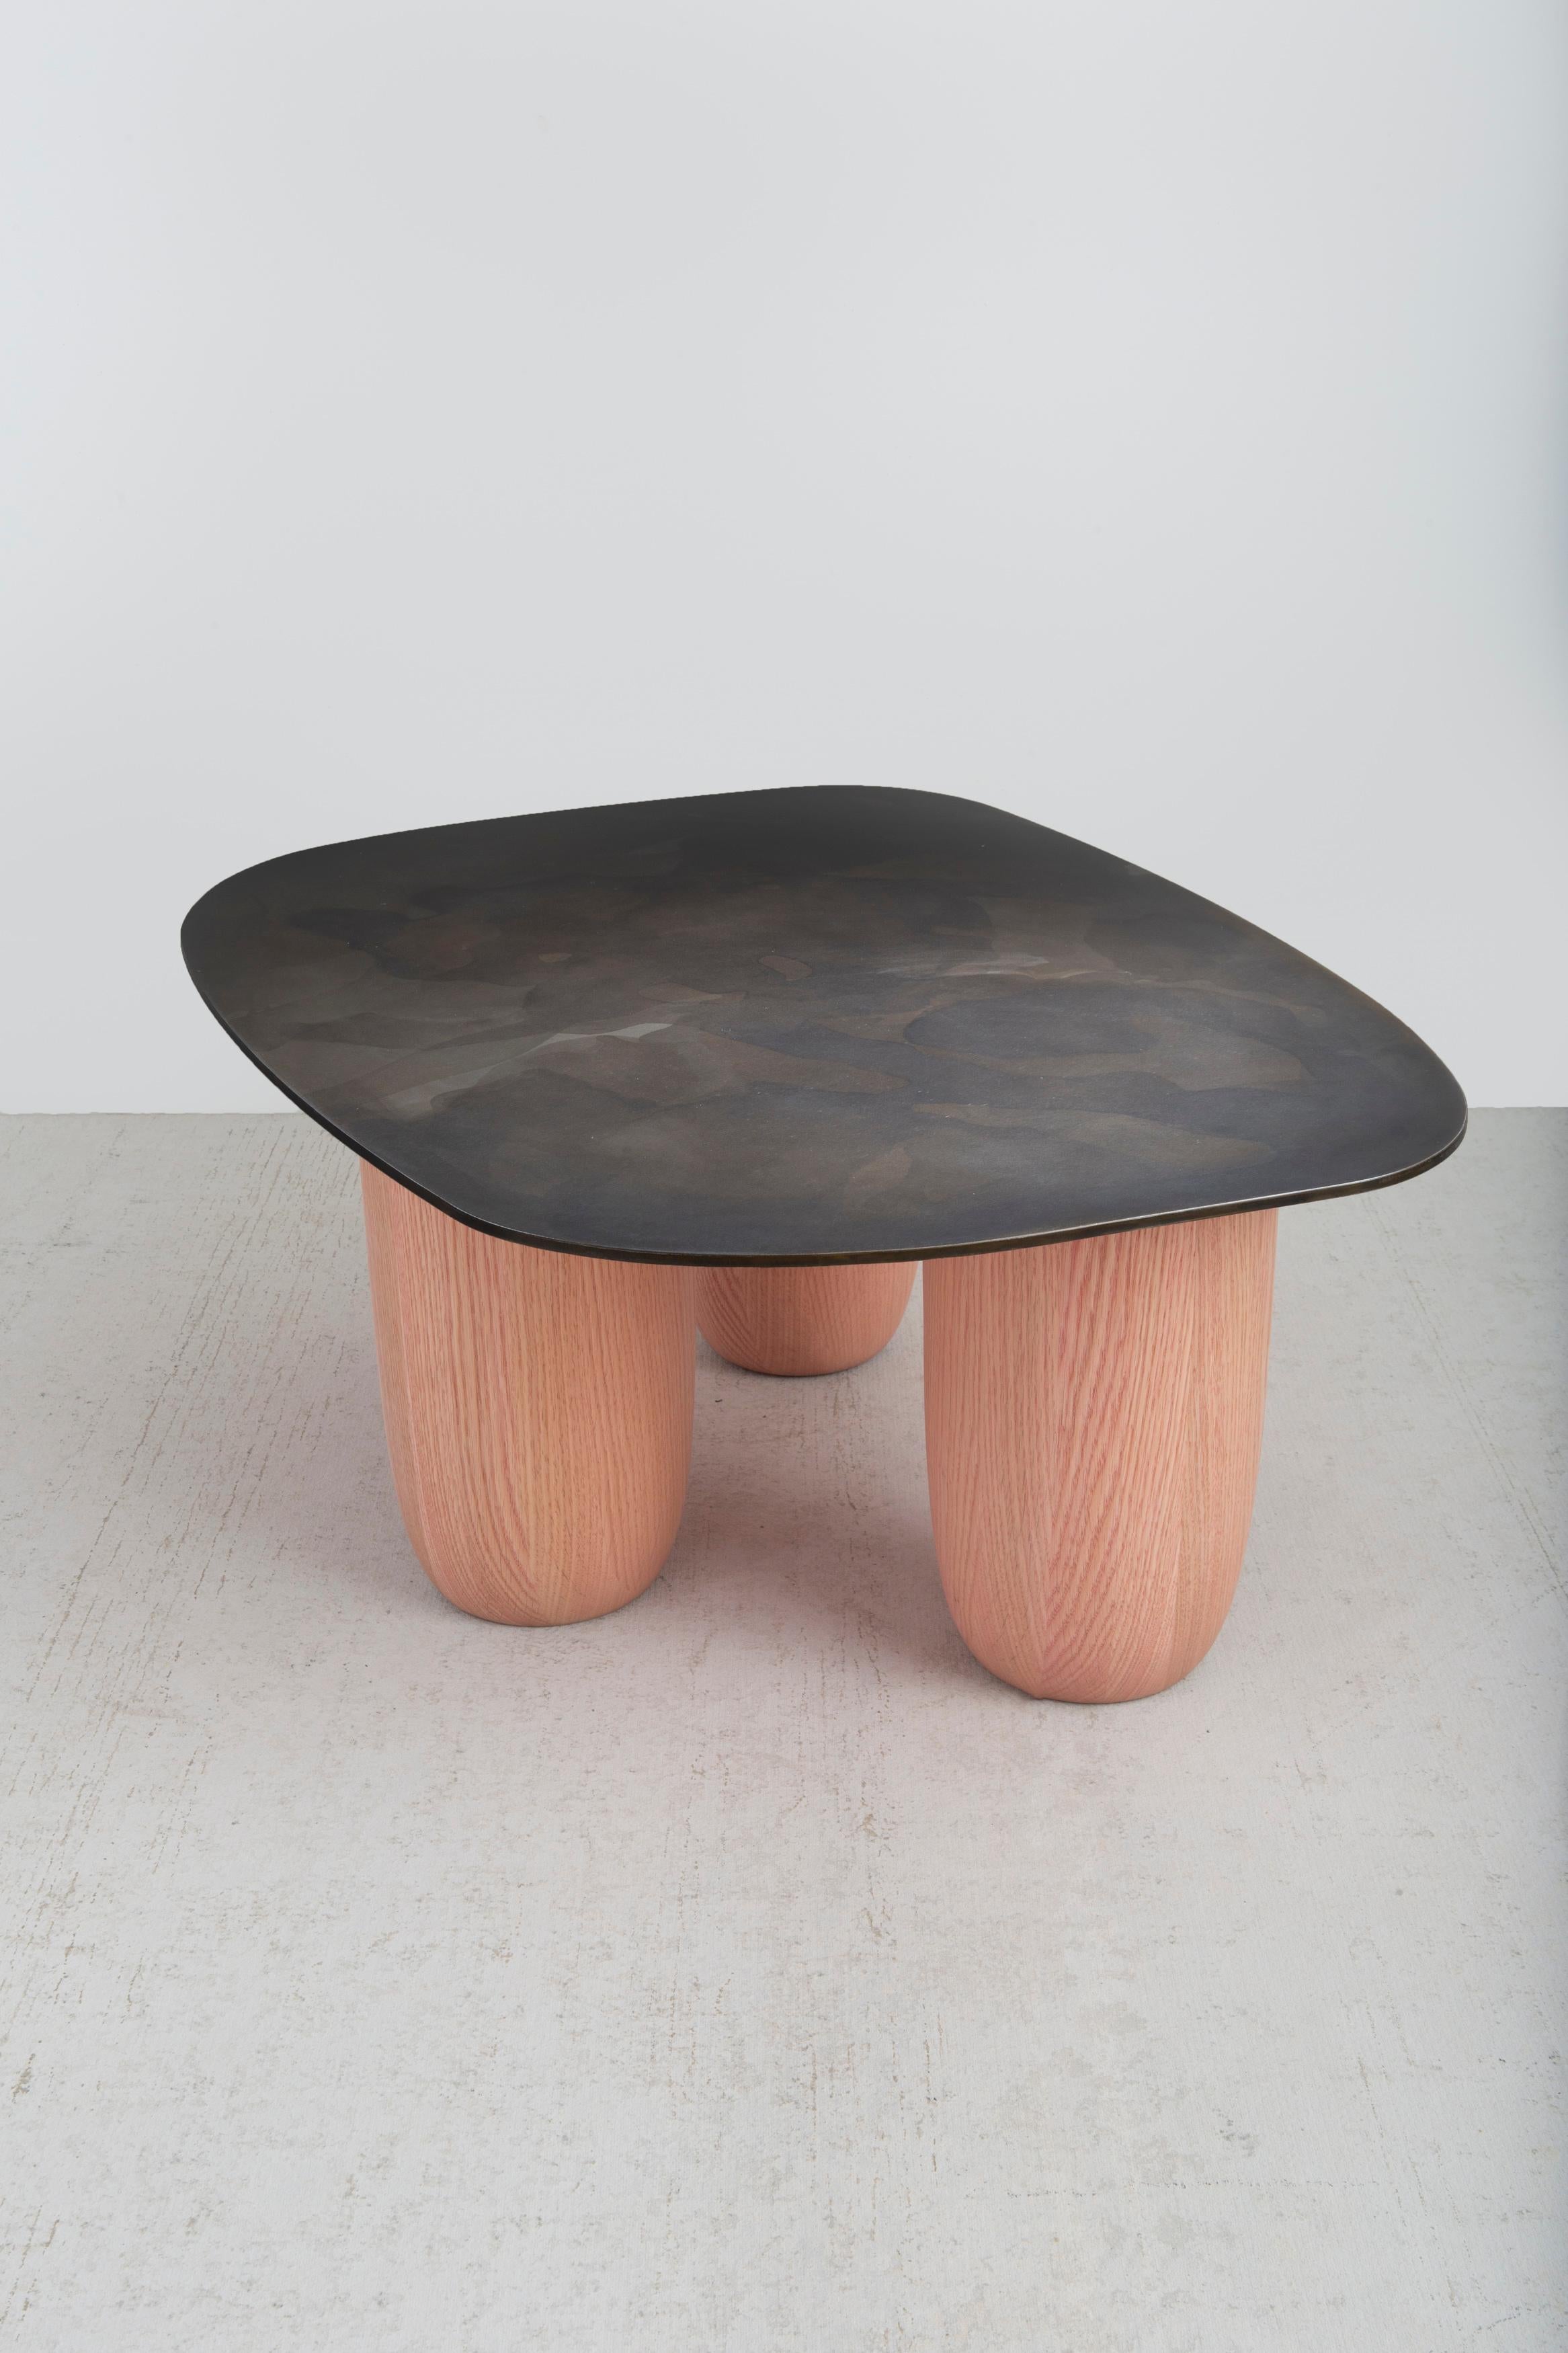 Our warm contemporary Sumo low tables were introduced at Design Miami 2020. This design was influenced by Japanese minimalist aesthetics and very much inspired by the revered master Isamu Noguchi. The qualities of the design resemble a softened